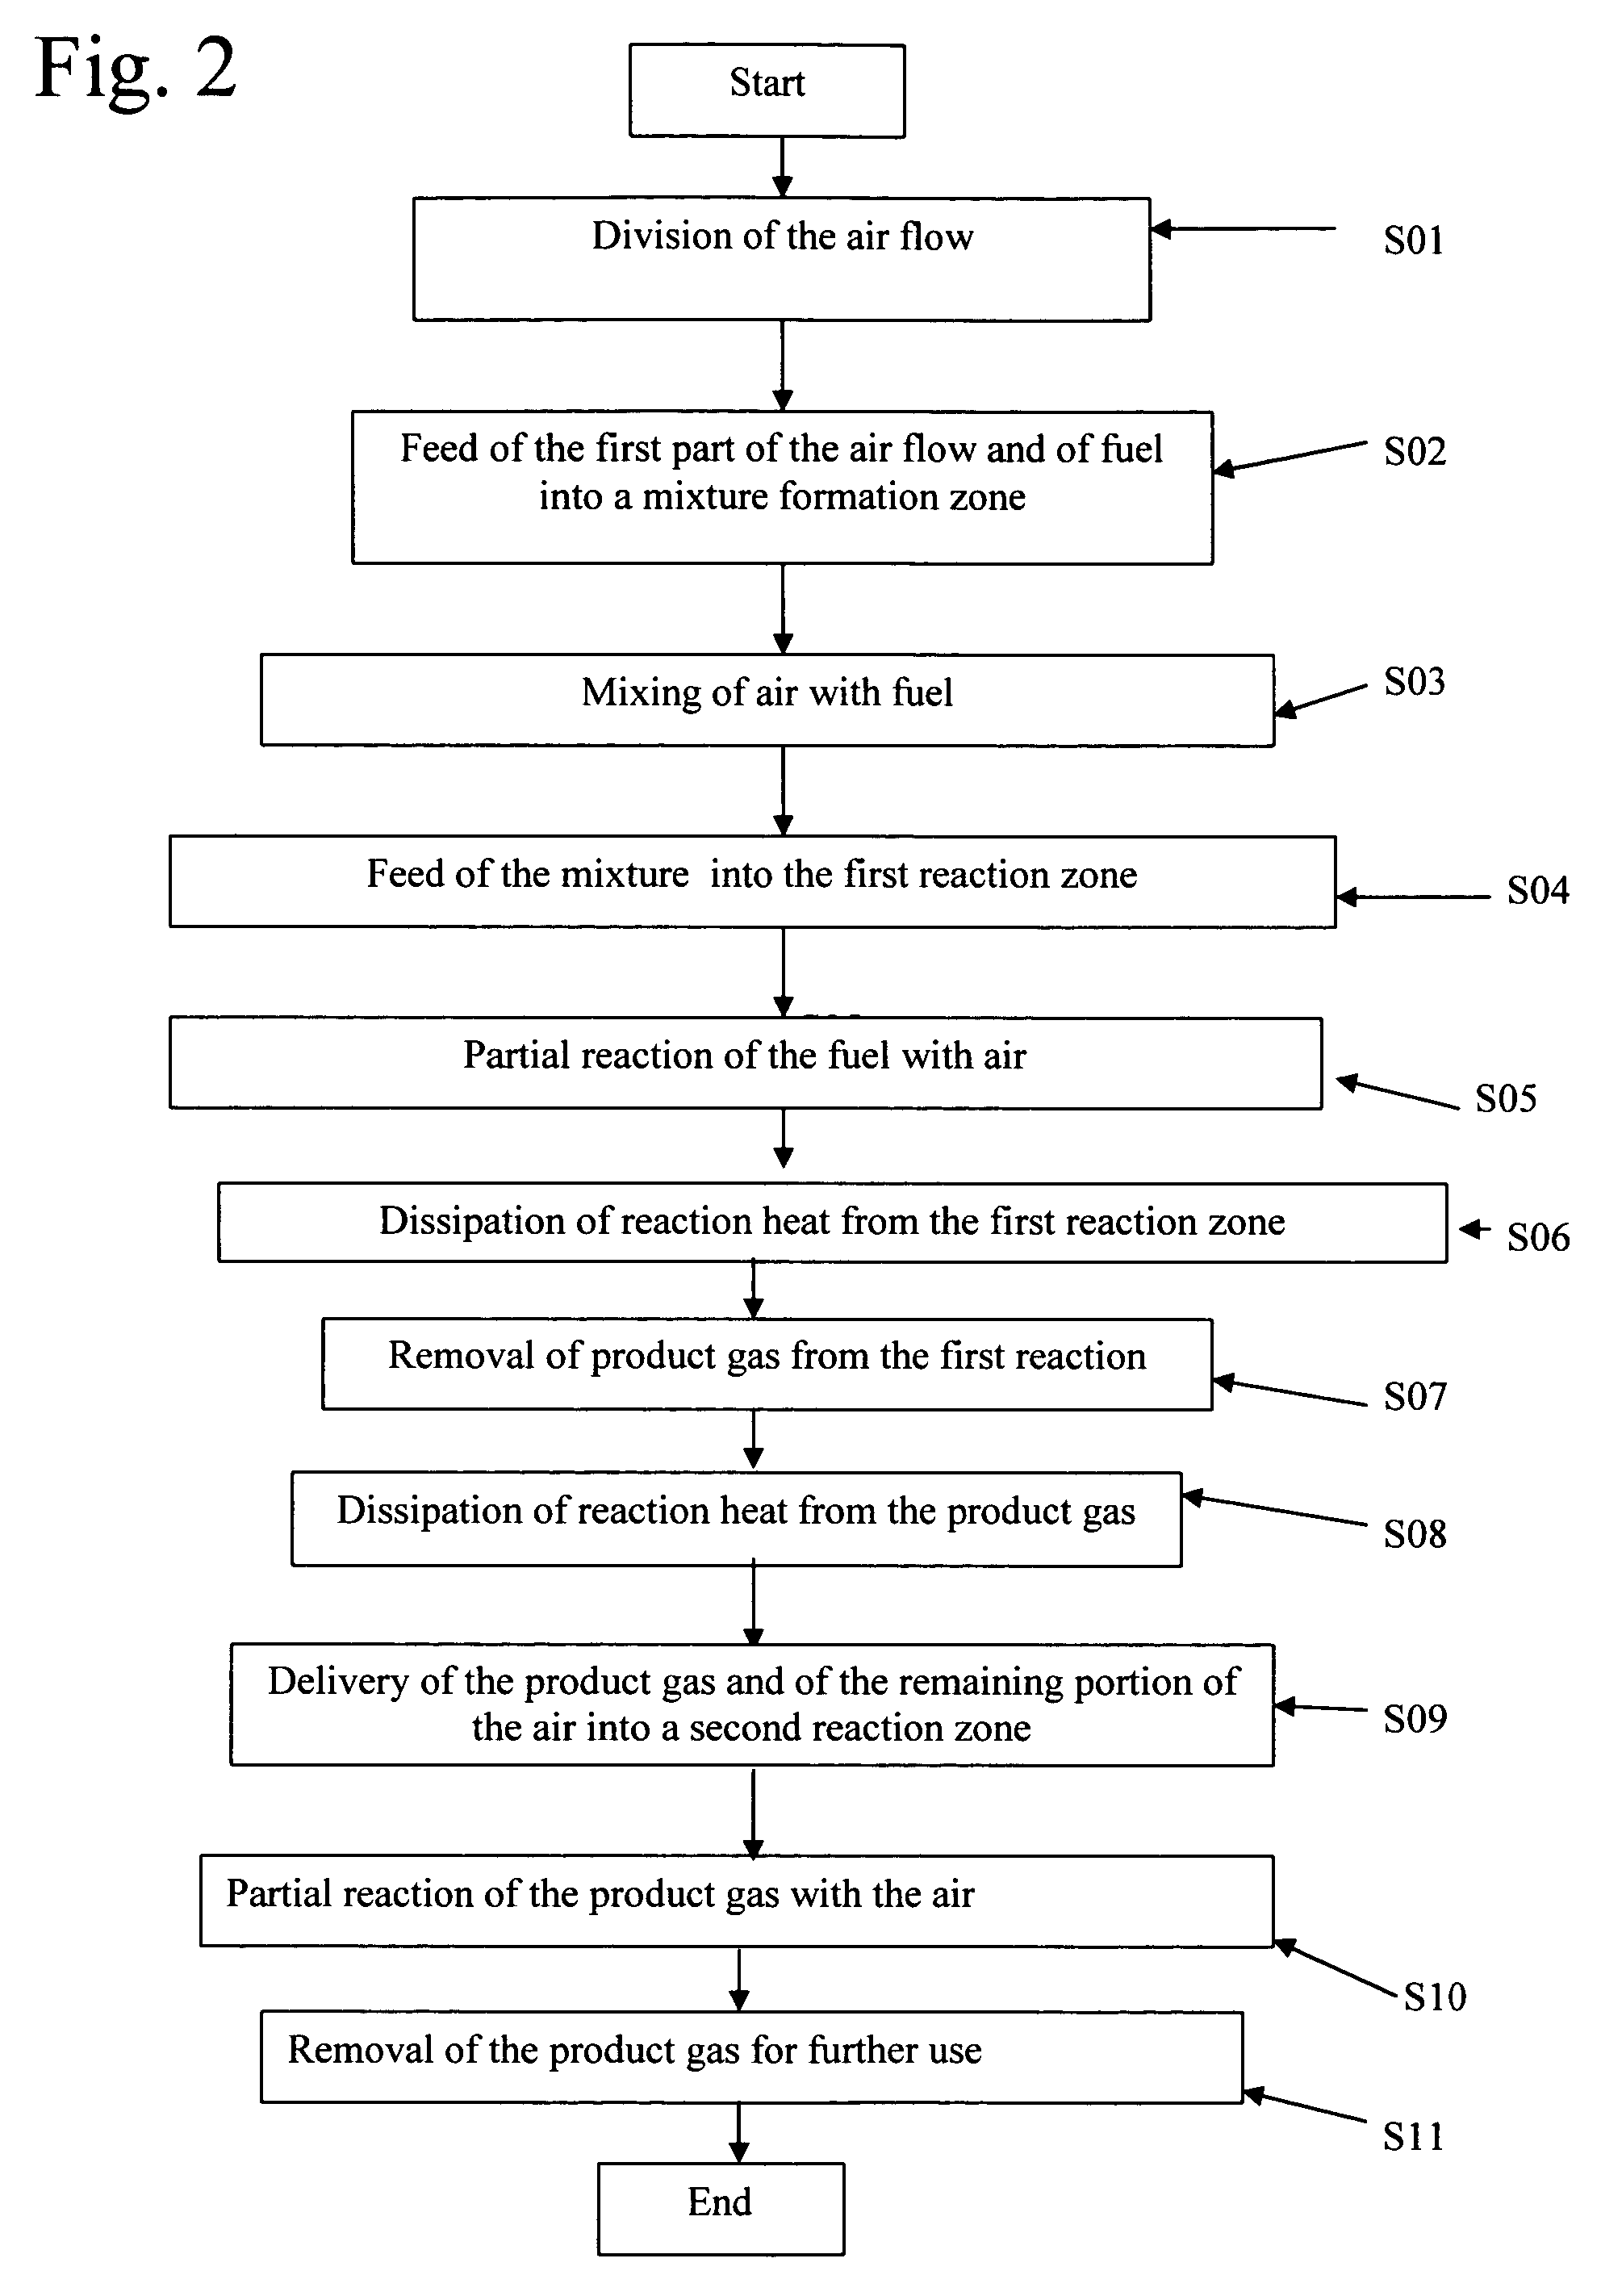 System and process for reacting fuel and oxidizer into reformate